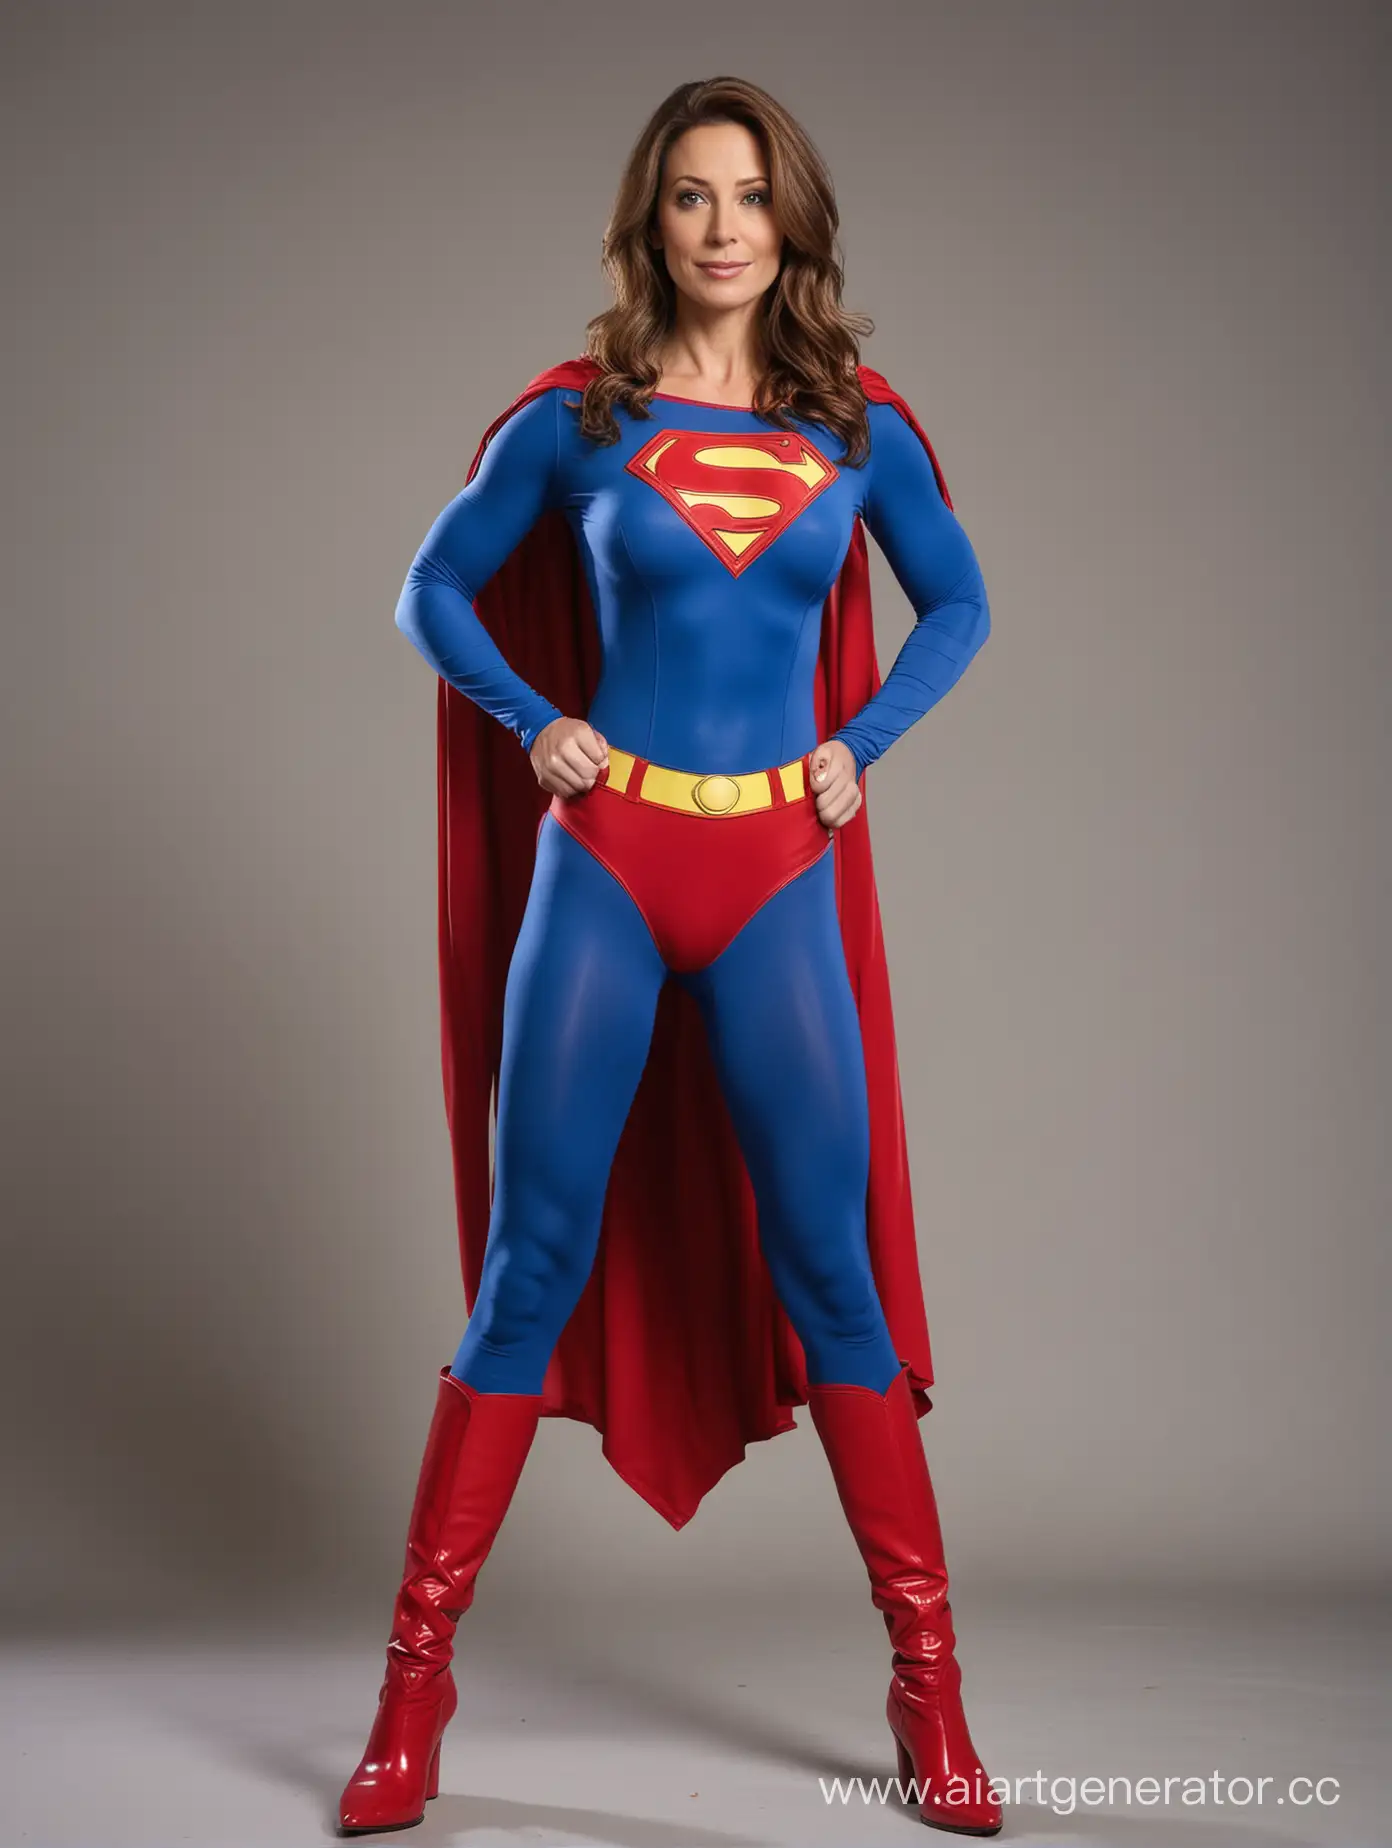 A beautiful woman with brown hair, age 40, she is confident and heroic, her body is very fit and muscular, she is wearing the classic Superman costume with blue spandex leggings, red briefs, red boots, red cape